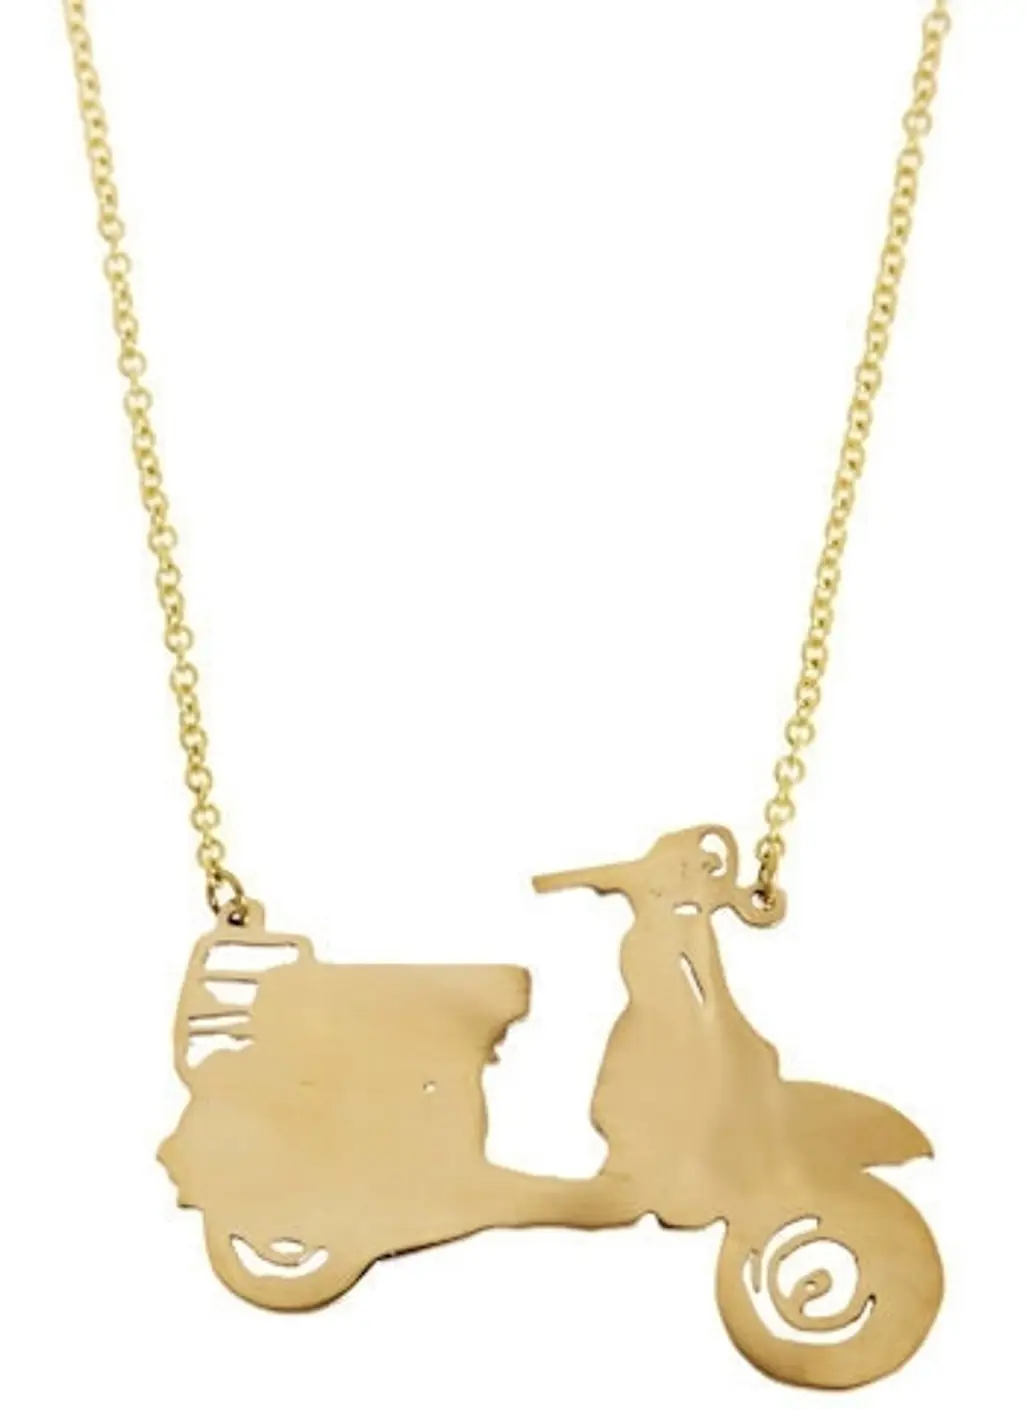 The Cuter Scooter Necklace